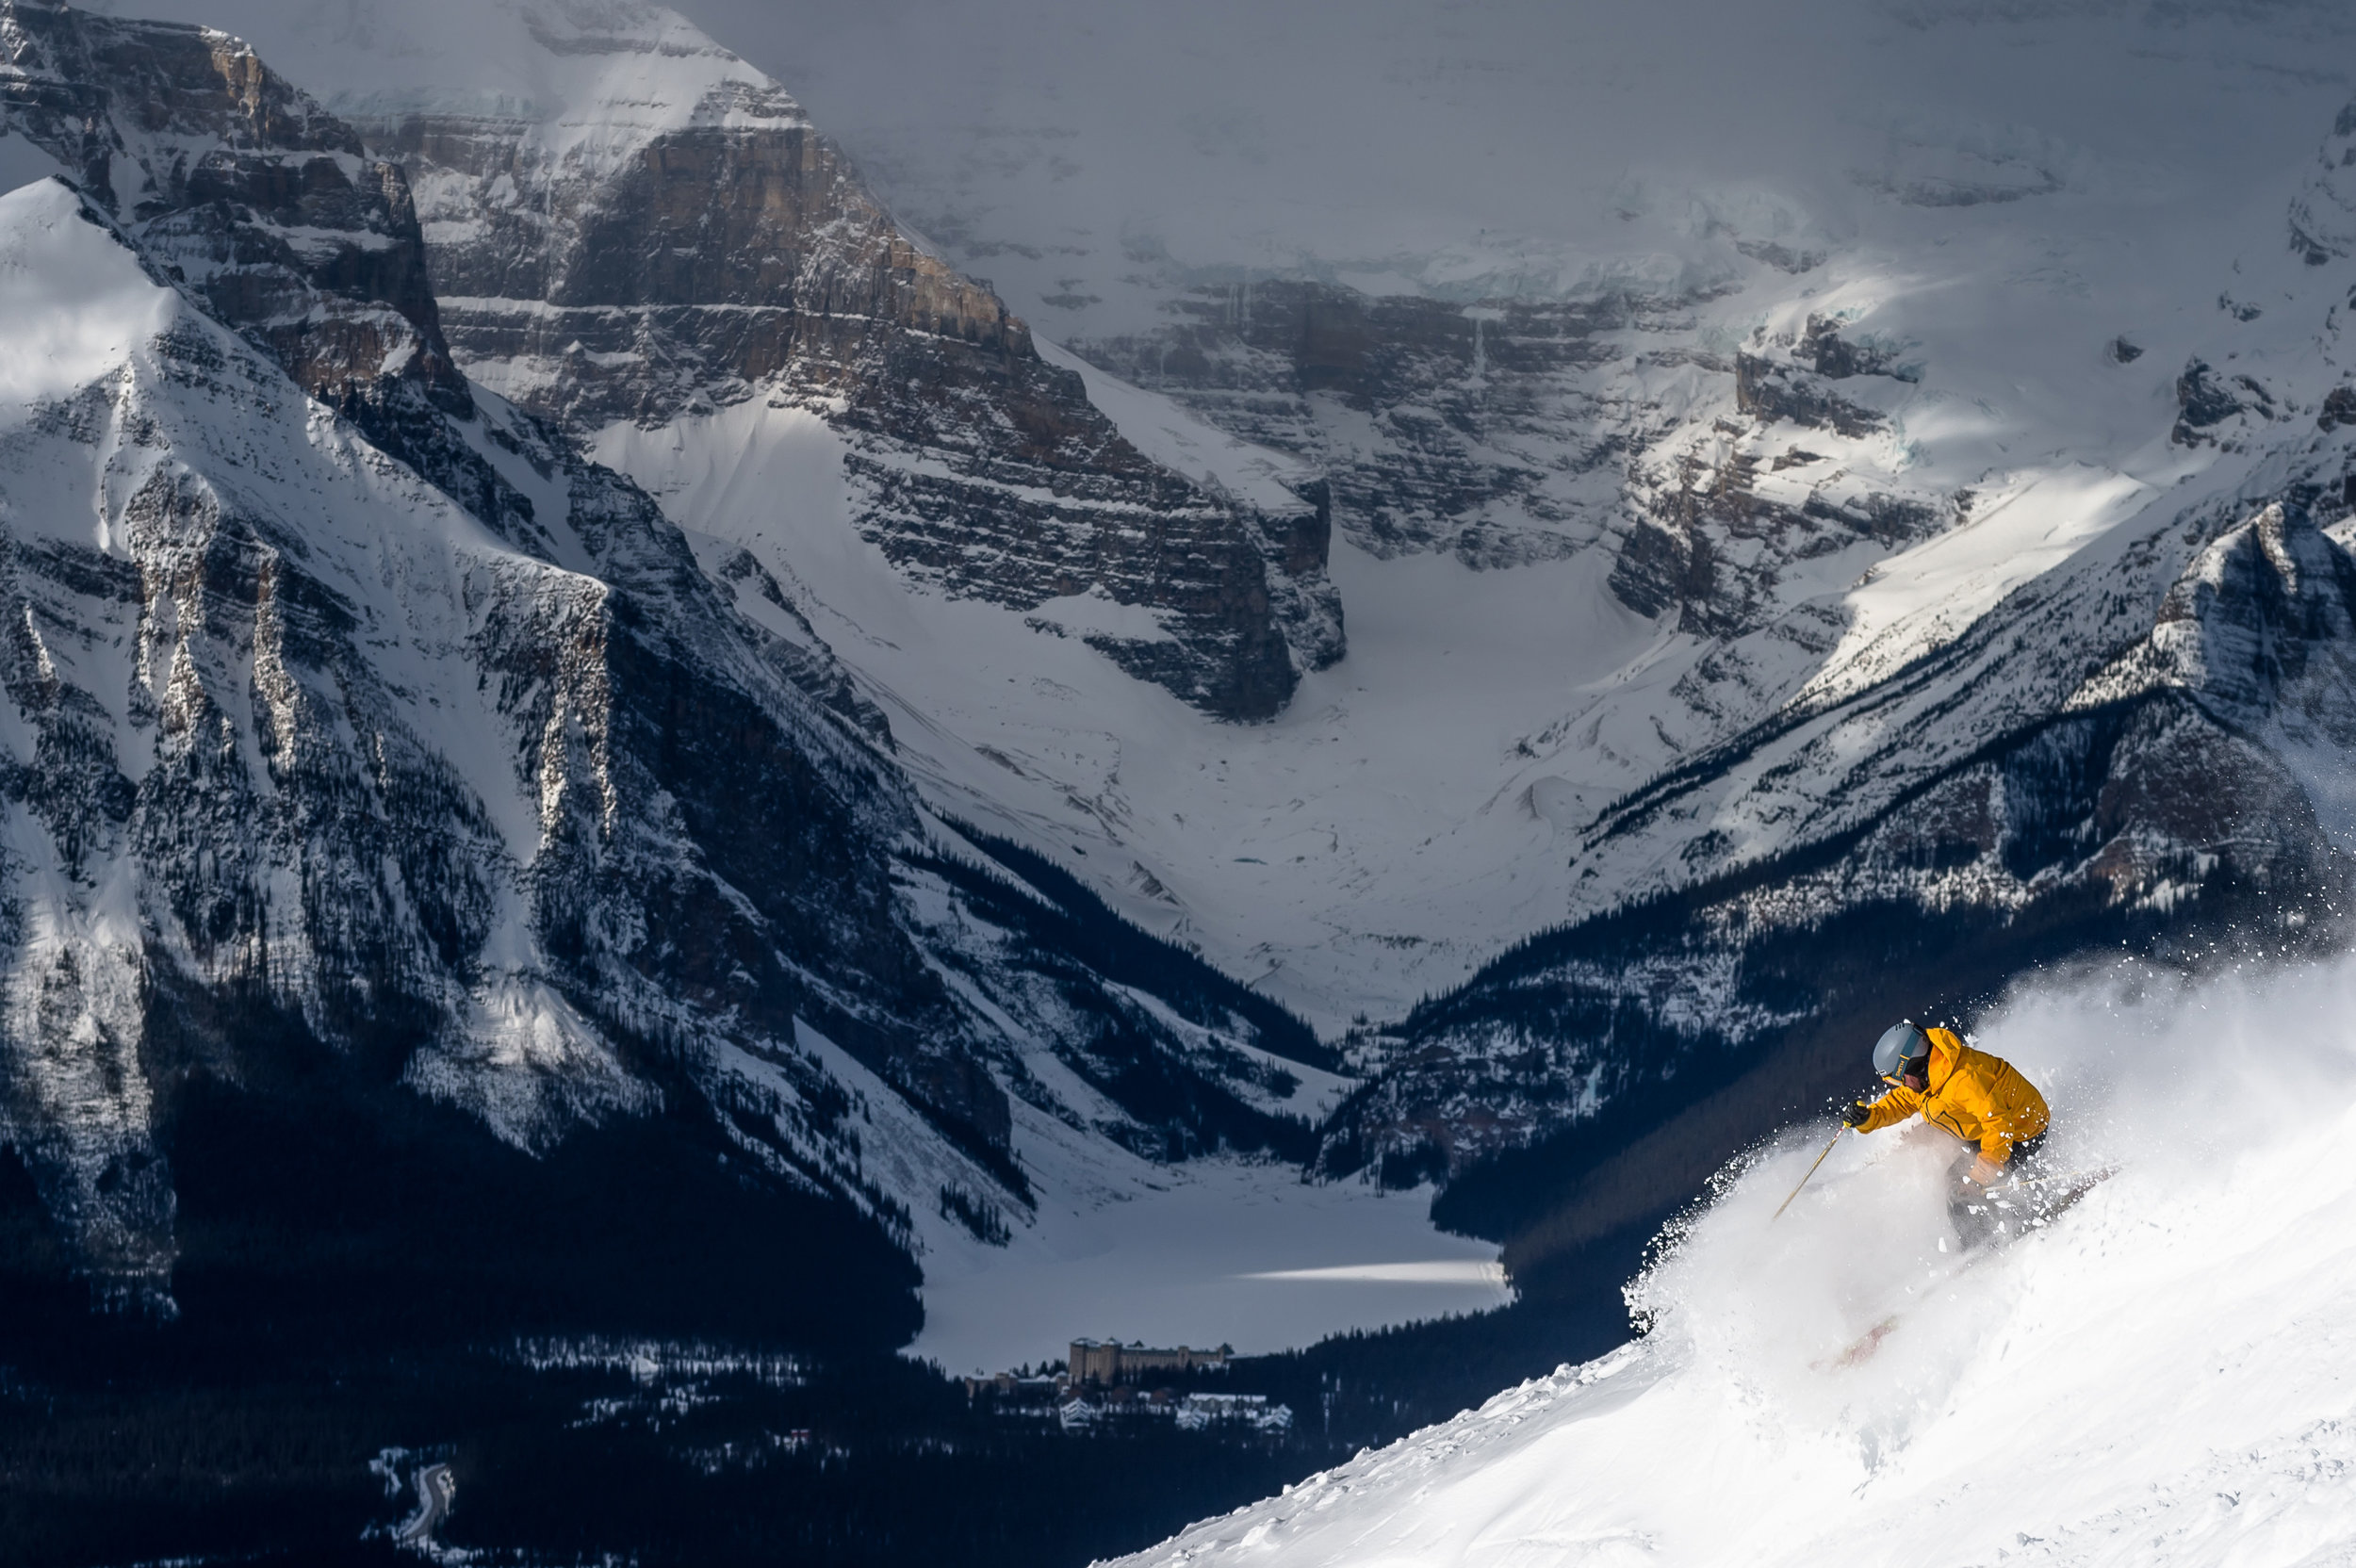 Guided Rocky Mountain ski tour in Banff and Lake Louise.